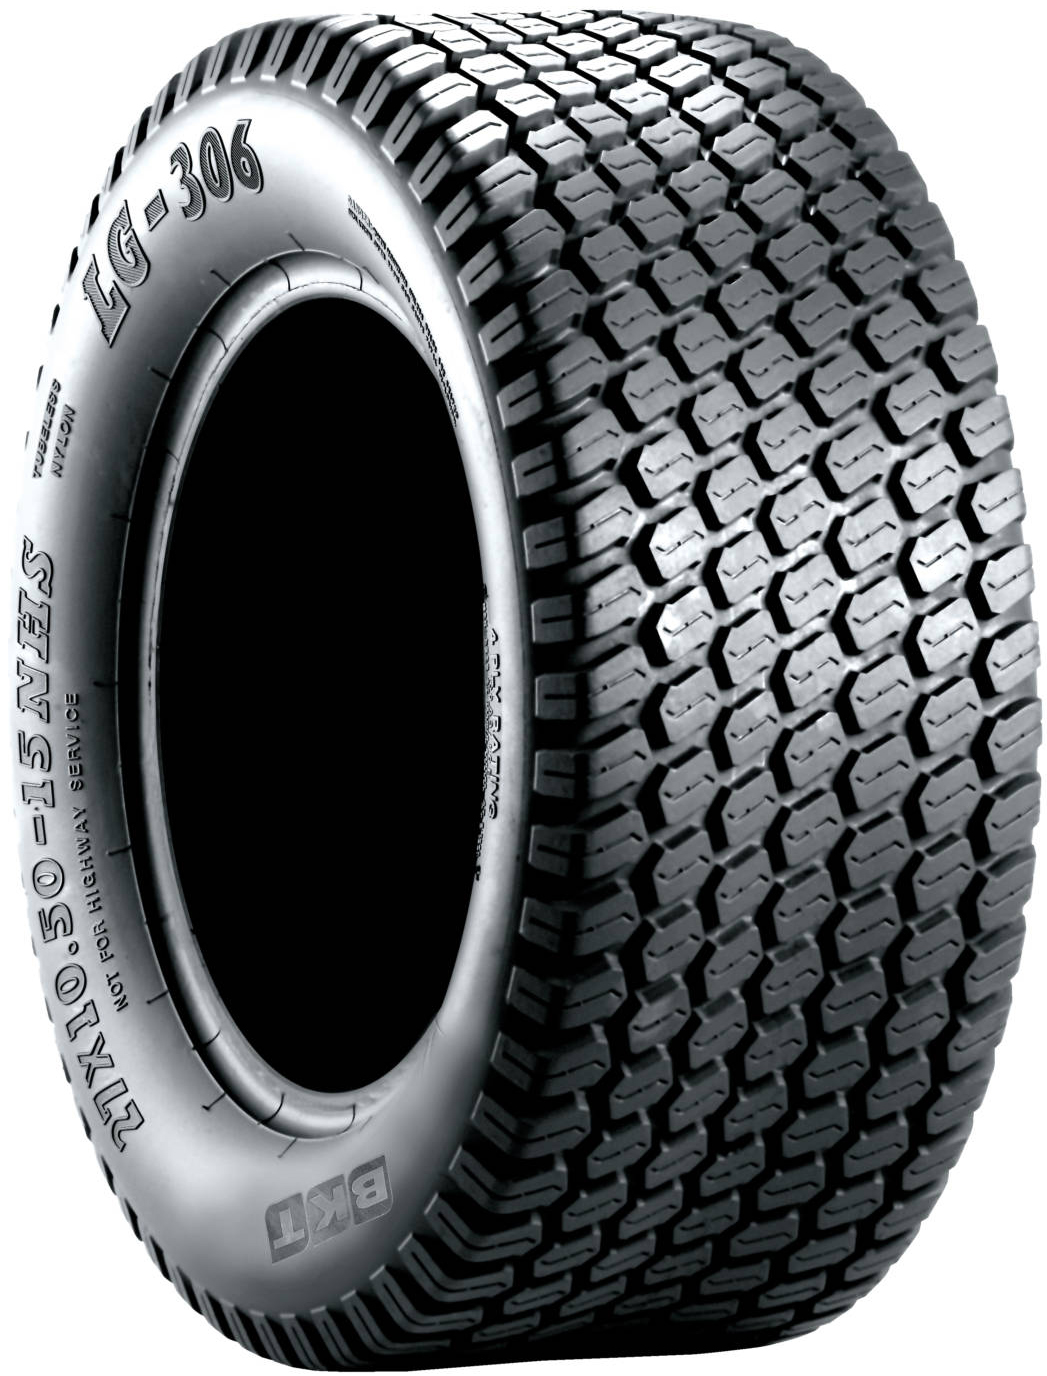 product_type-industrial_tires BKT LG-306 4 TL 10 R10